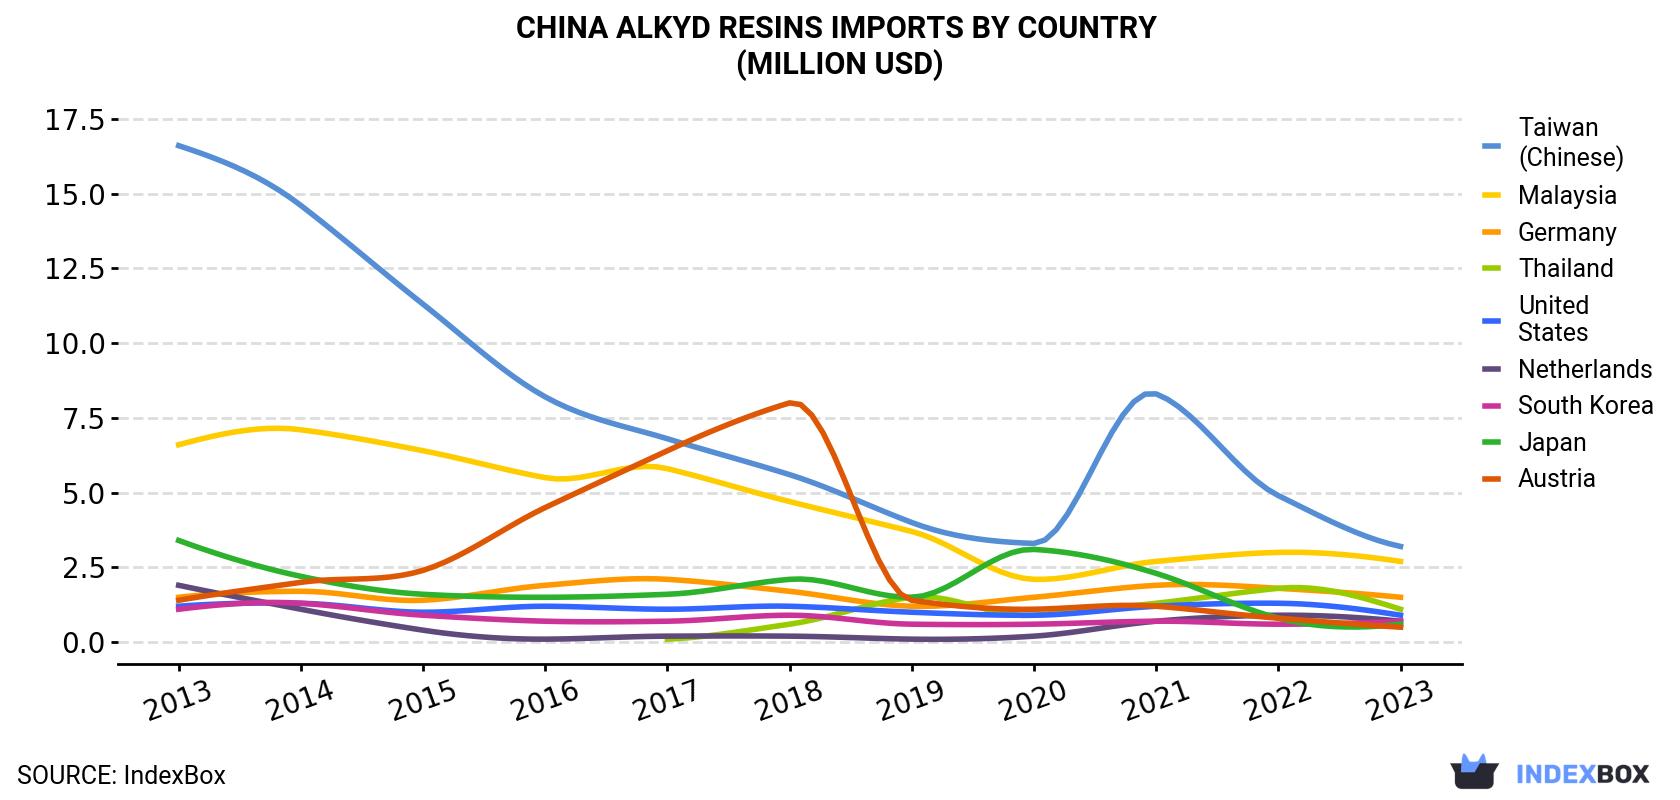 China Alkyd Resins Imports By Country (Million USD)